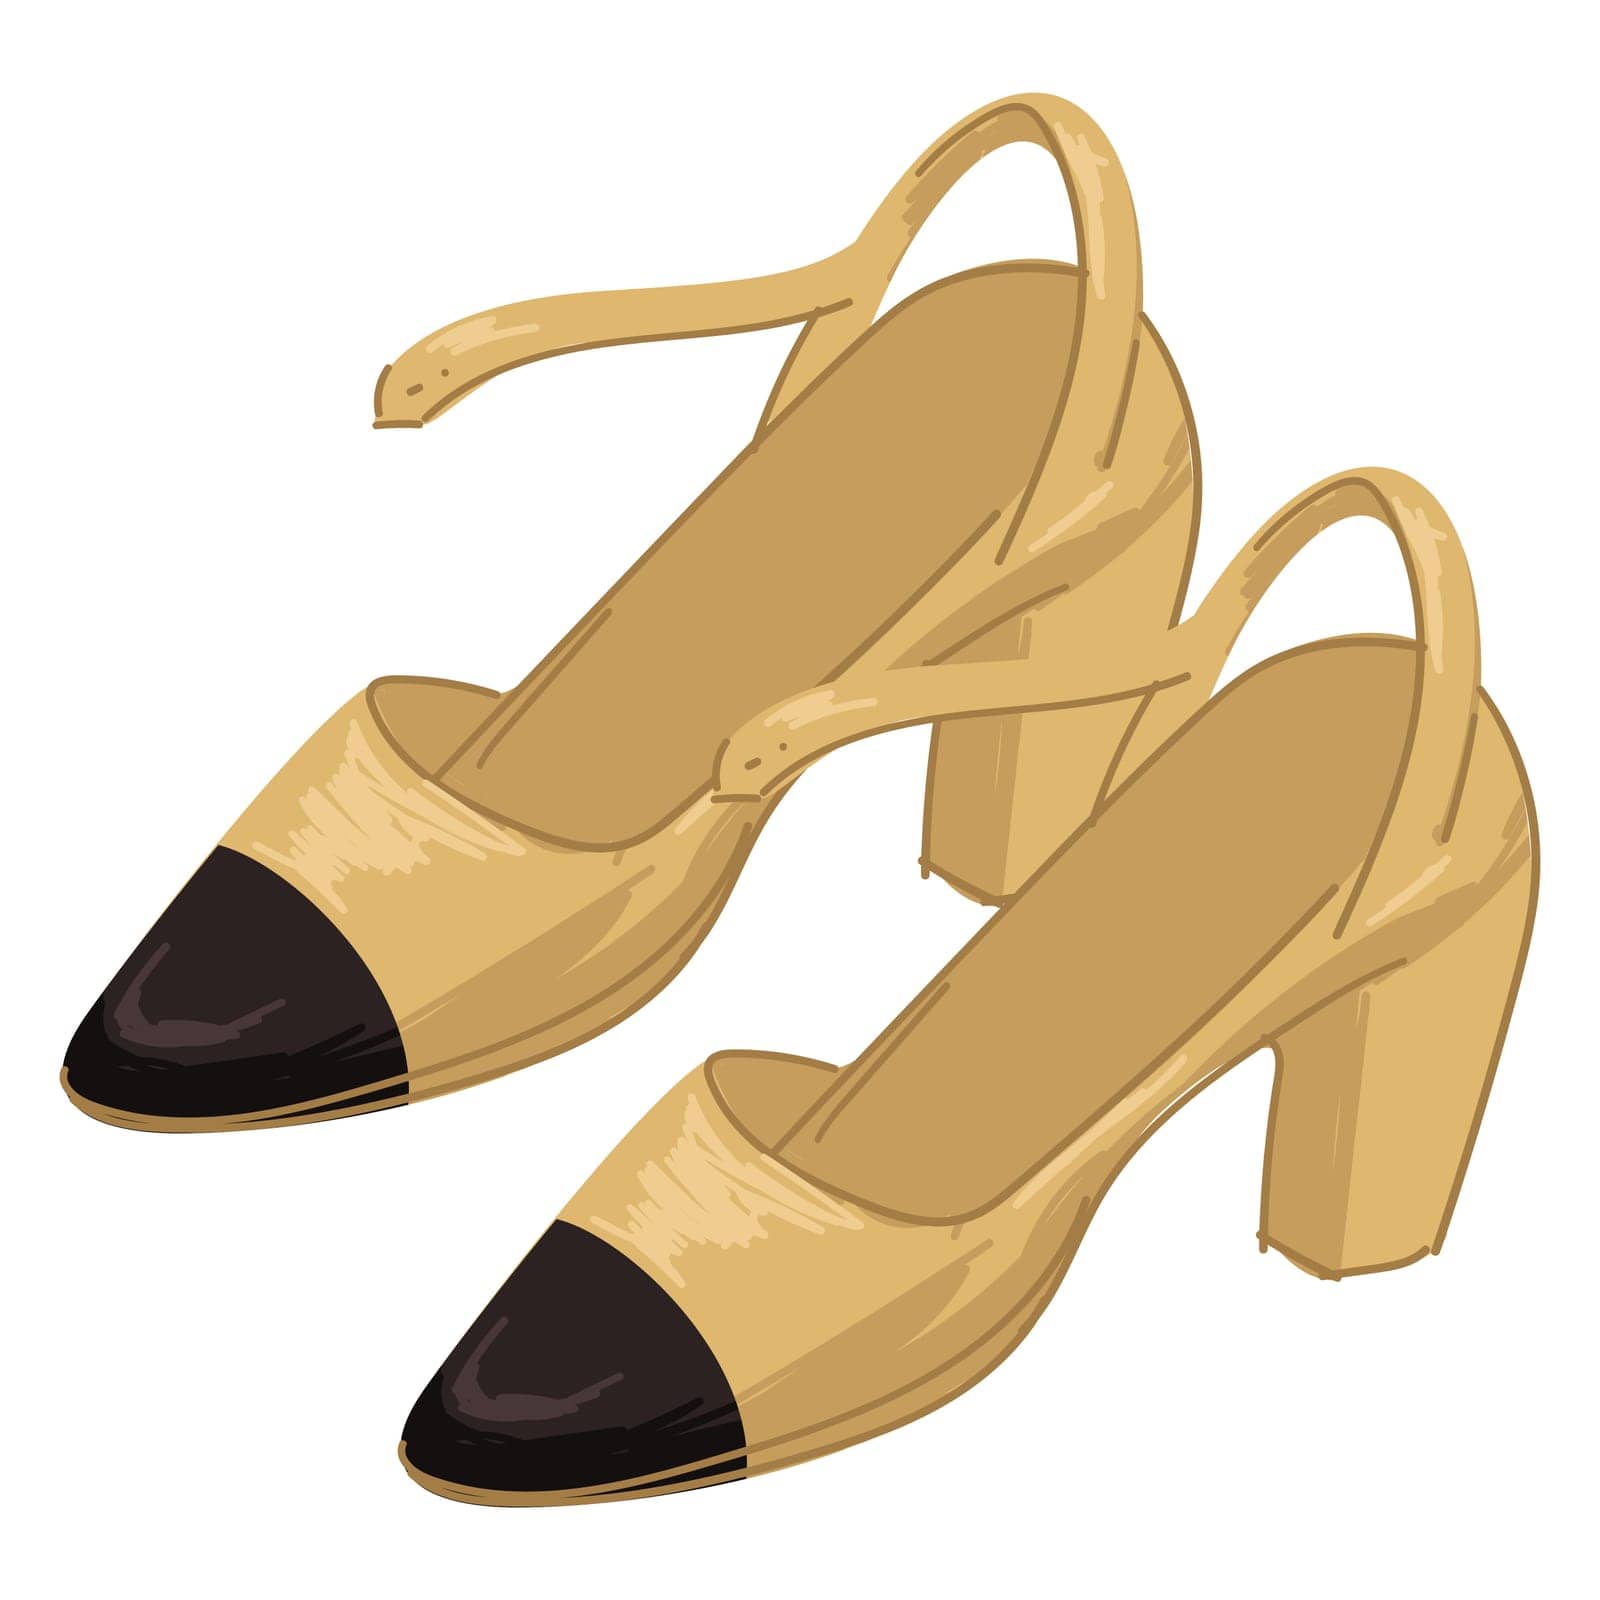 Fashion and trendy clothes, isolated pair of shoes on heels with straps and trendy design. Women footwear and fashionable model for summer or spring. Retro clothing of leather. Vector in flat style